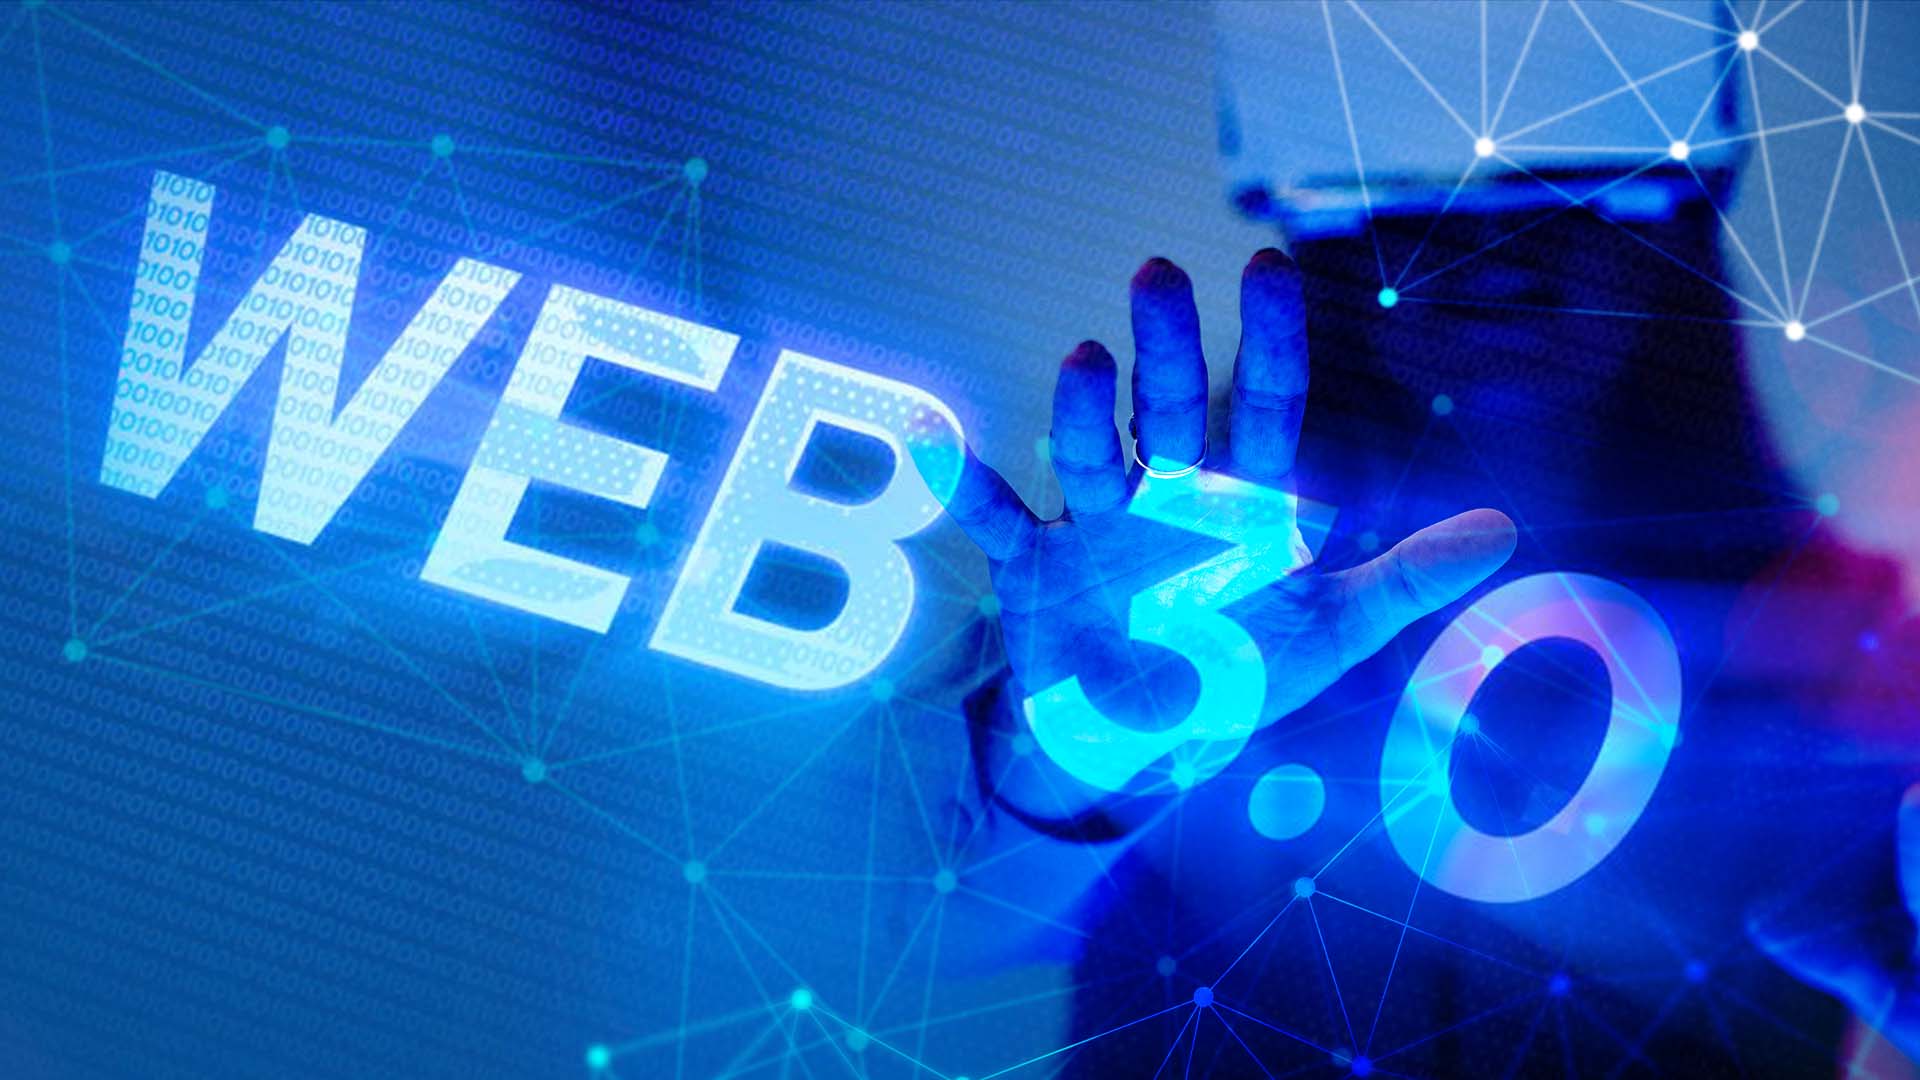 Top Prevision of Web3 and Metaverse Space for the year 2023 